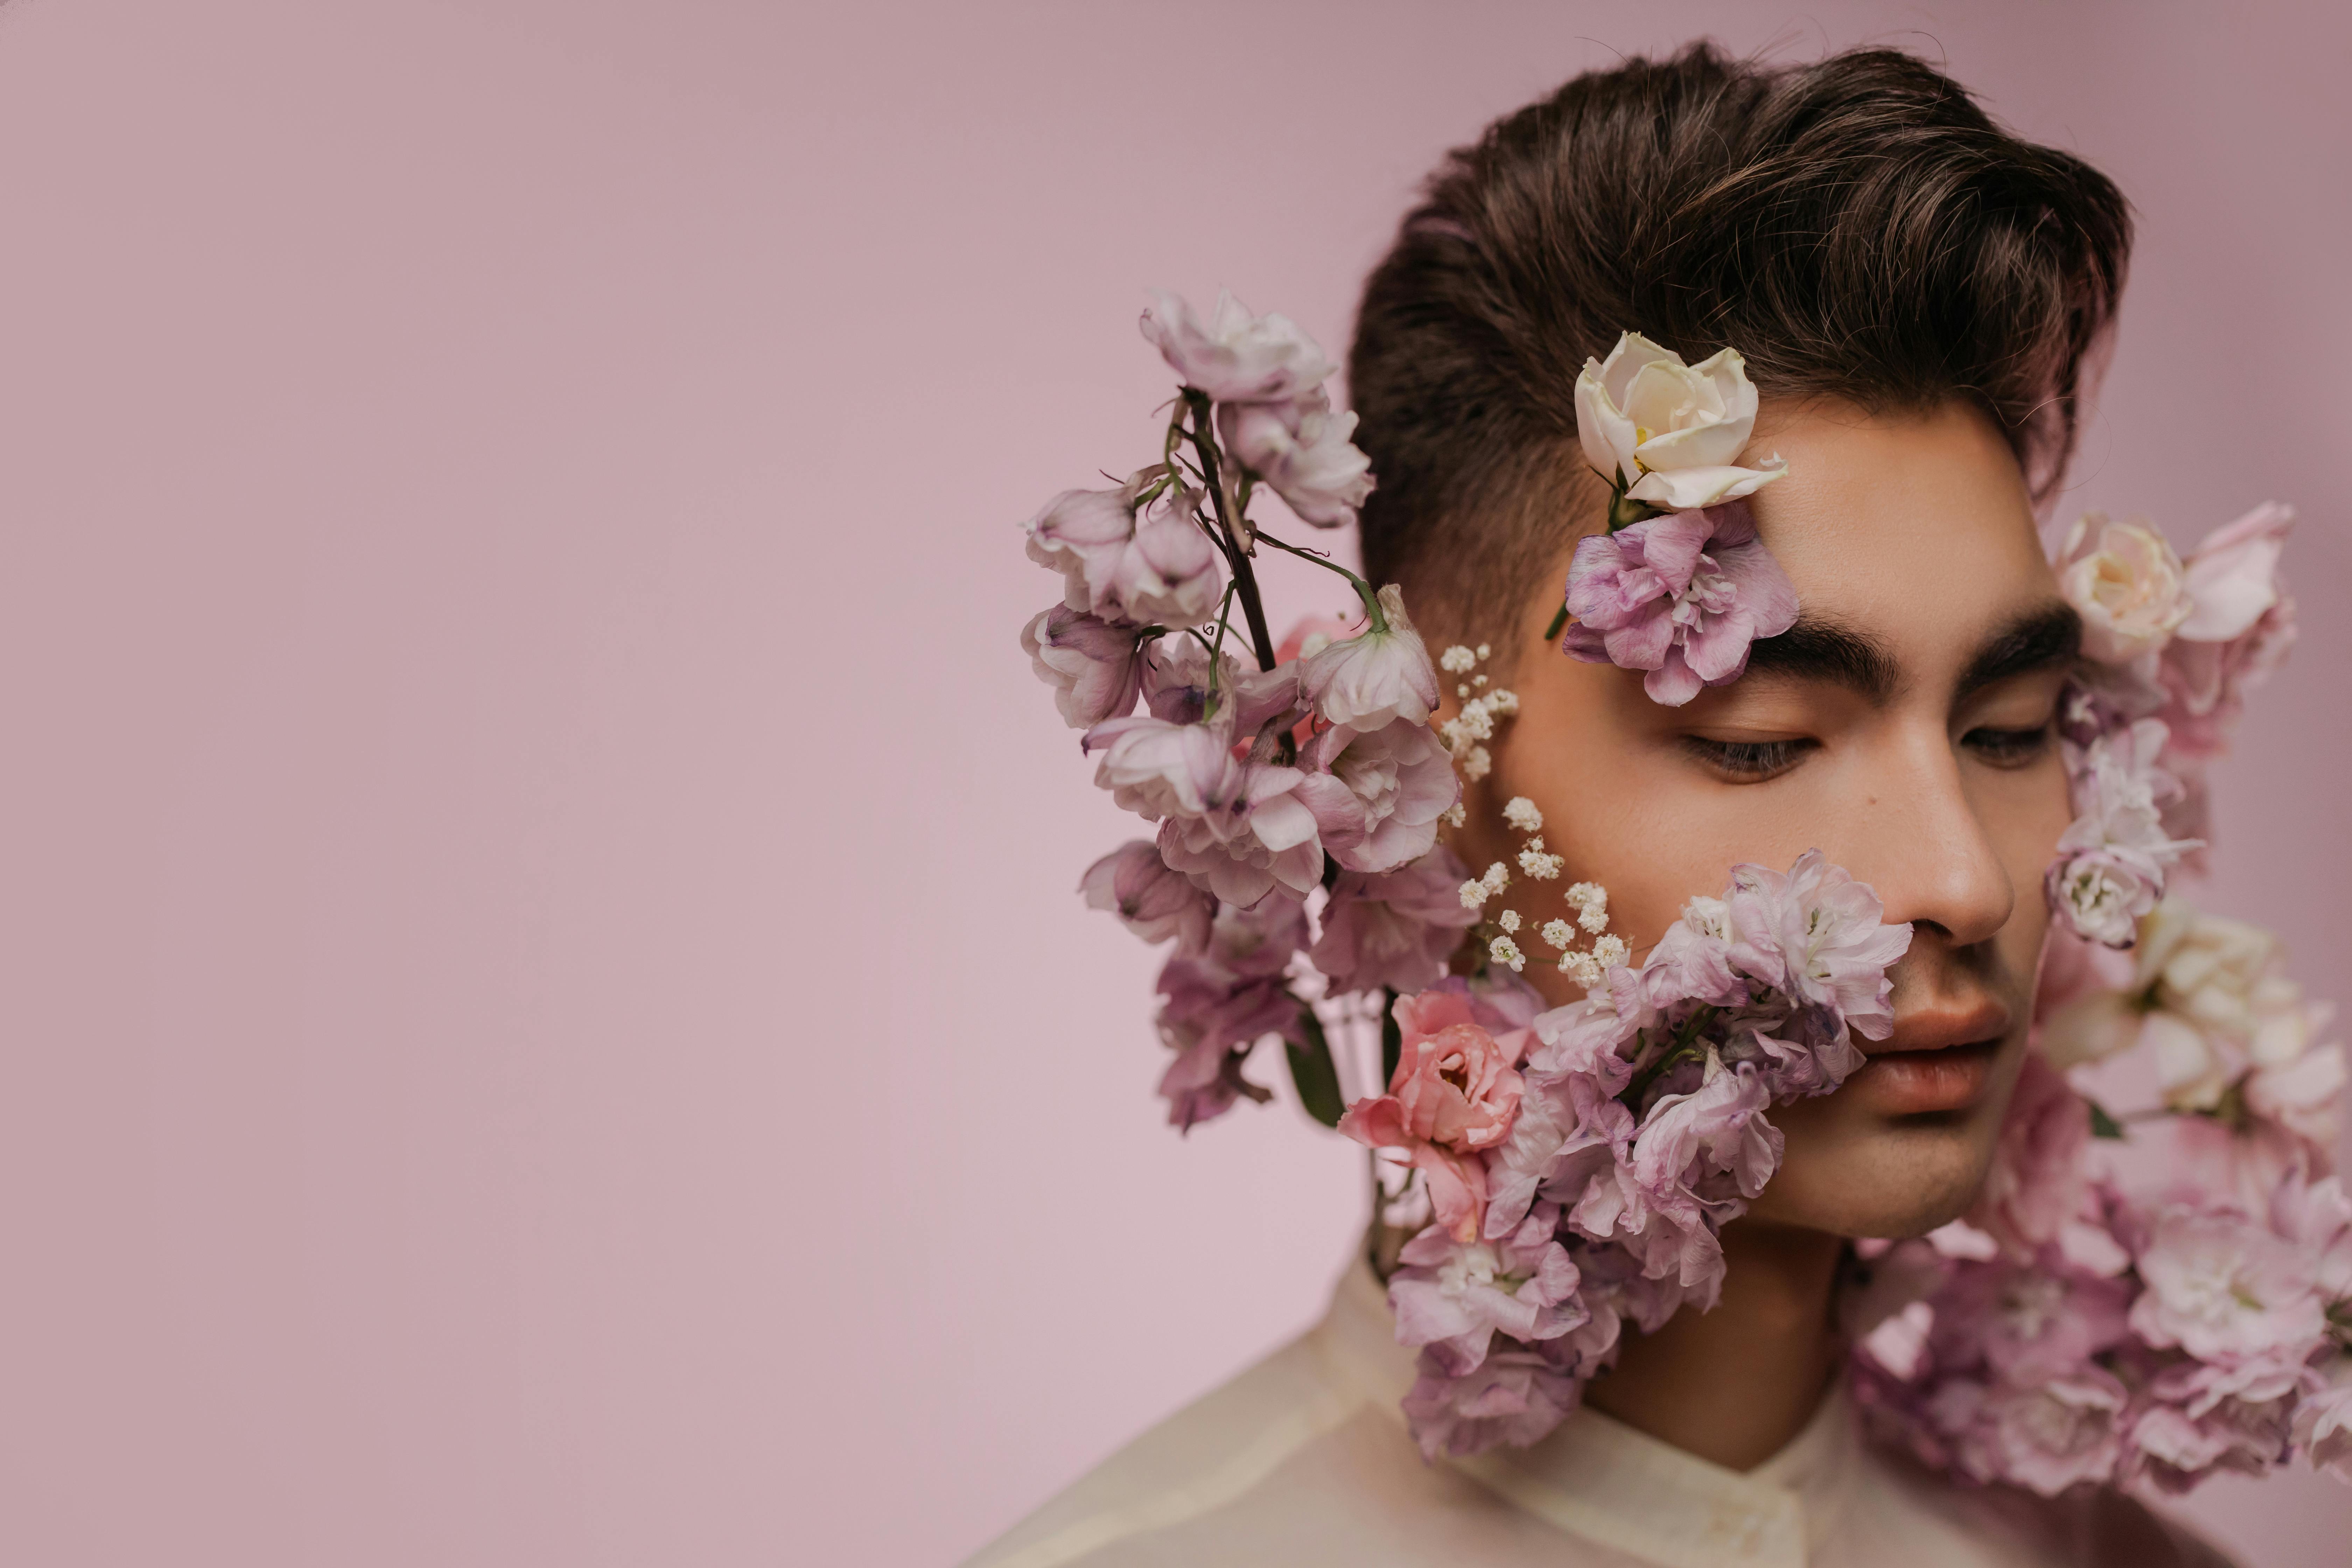 Download Man's Face With Pink Flowers Aesthetic Wallpaper